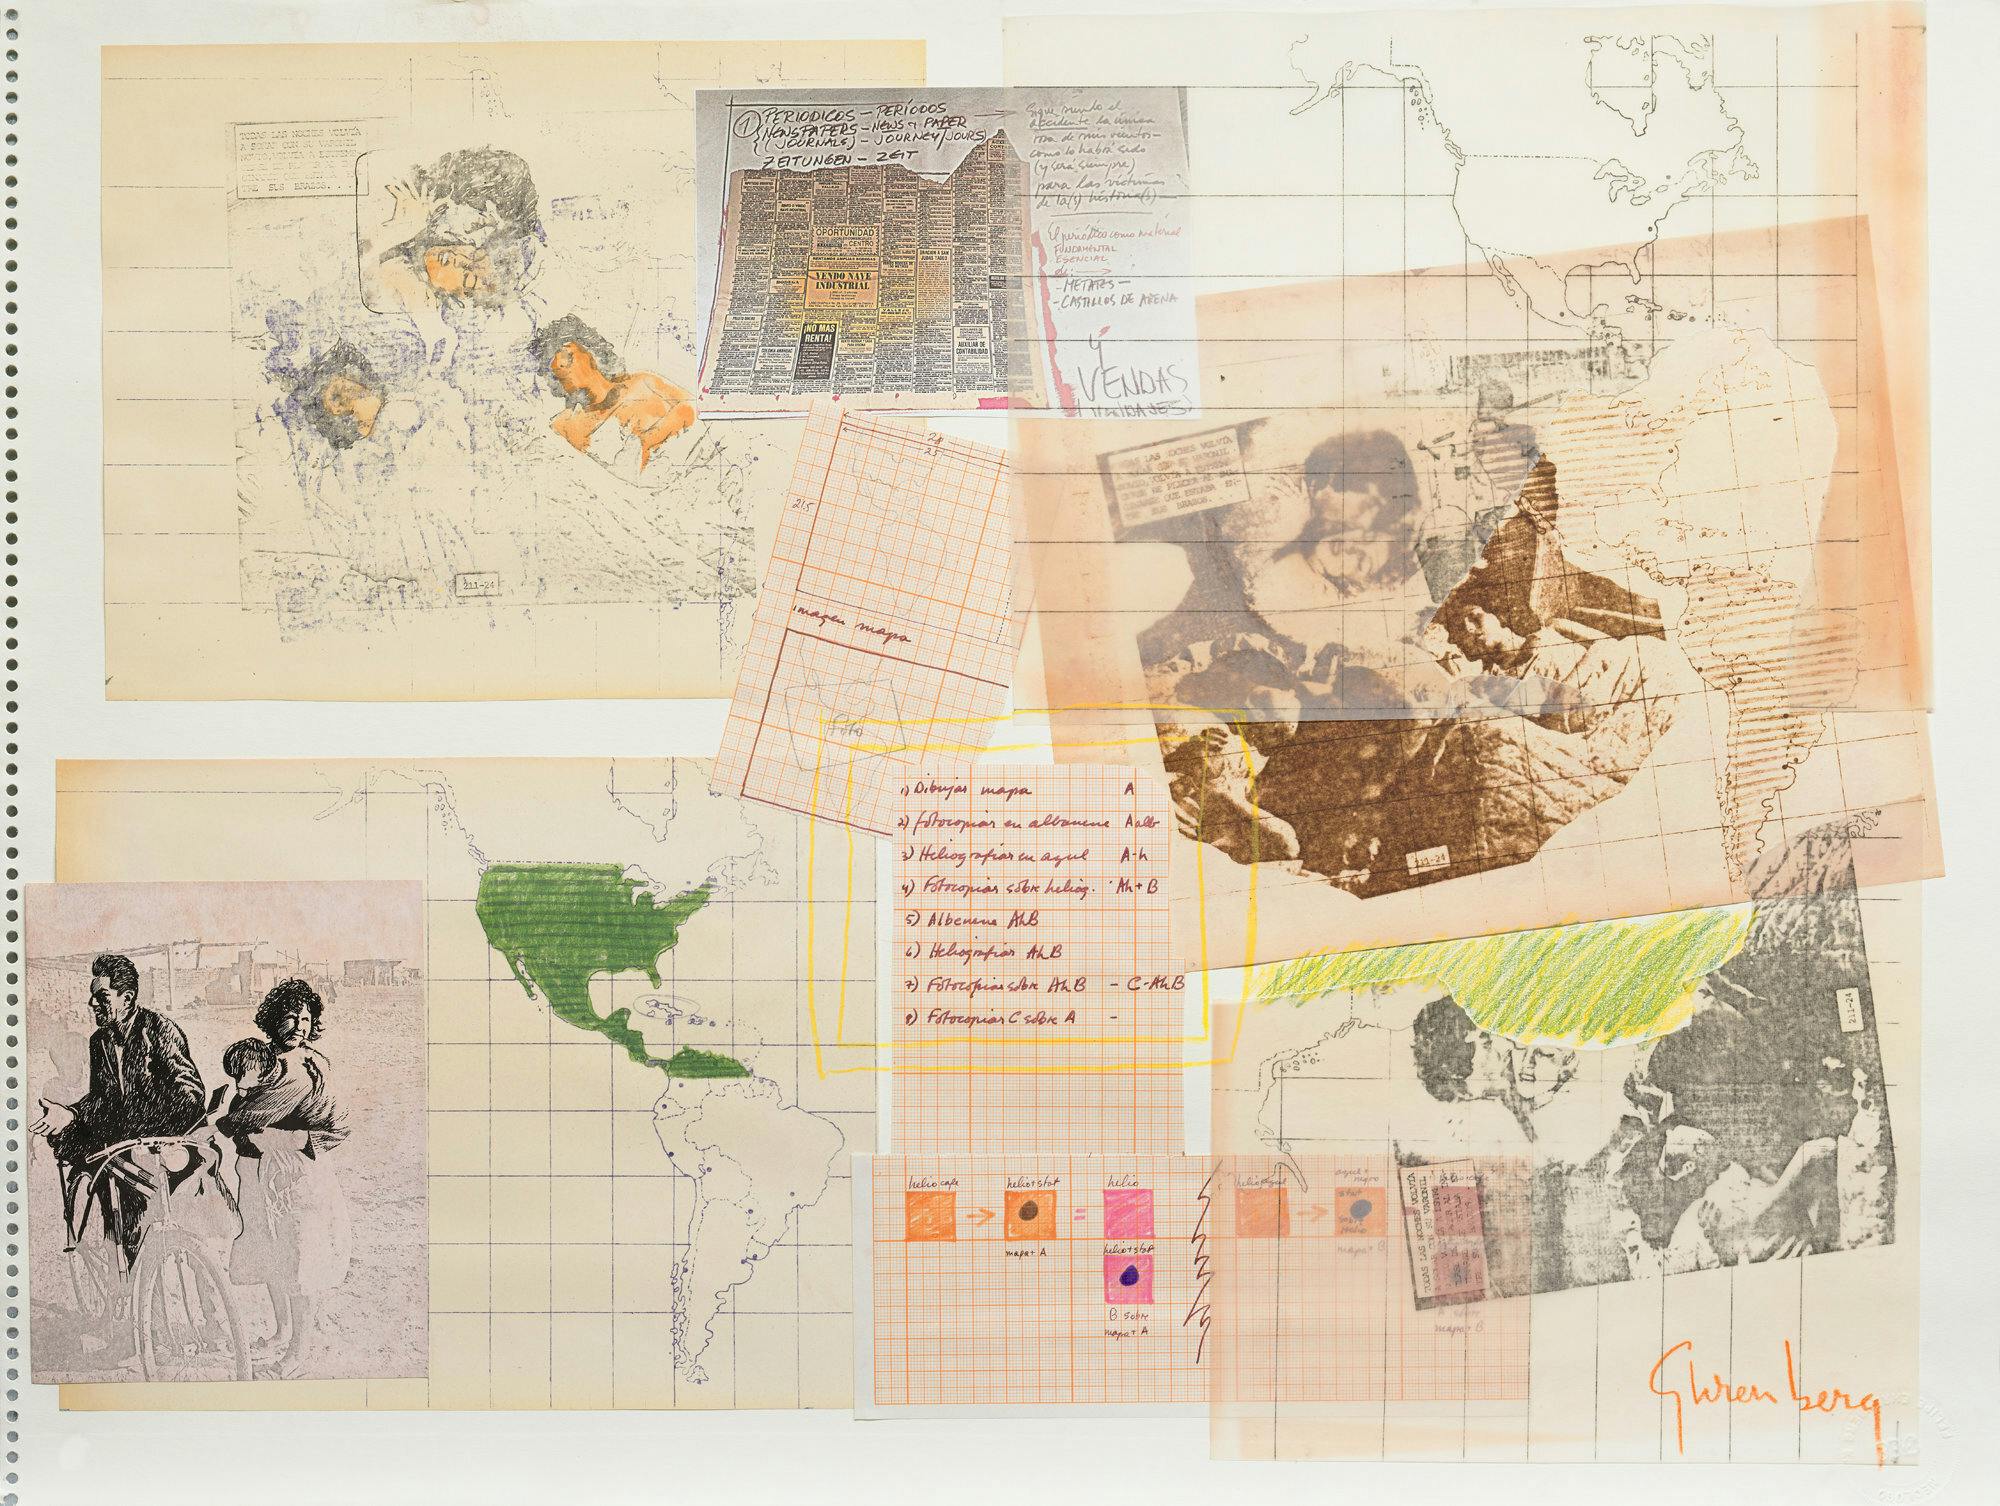 A collage showing fragments of maps with images and drawings of figures.